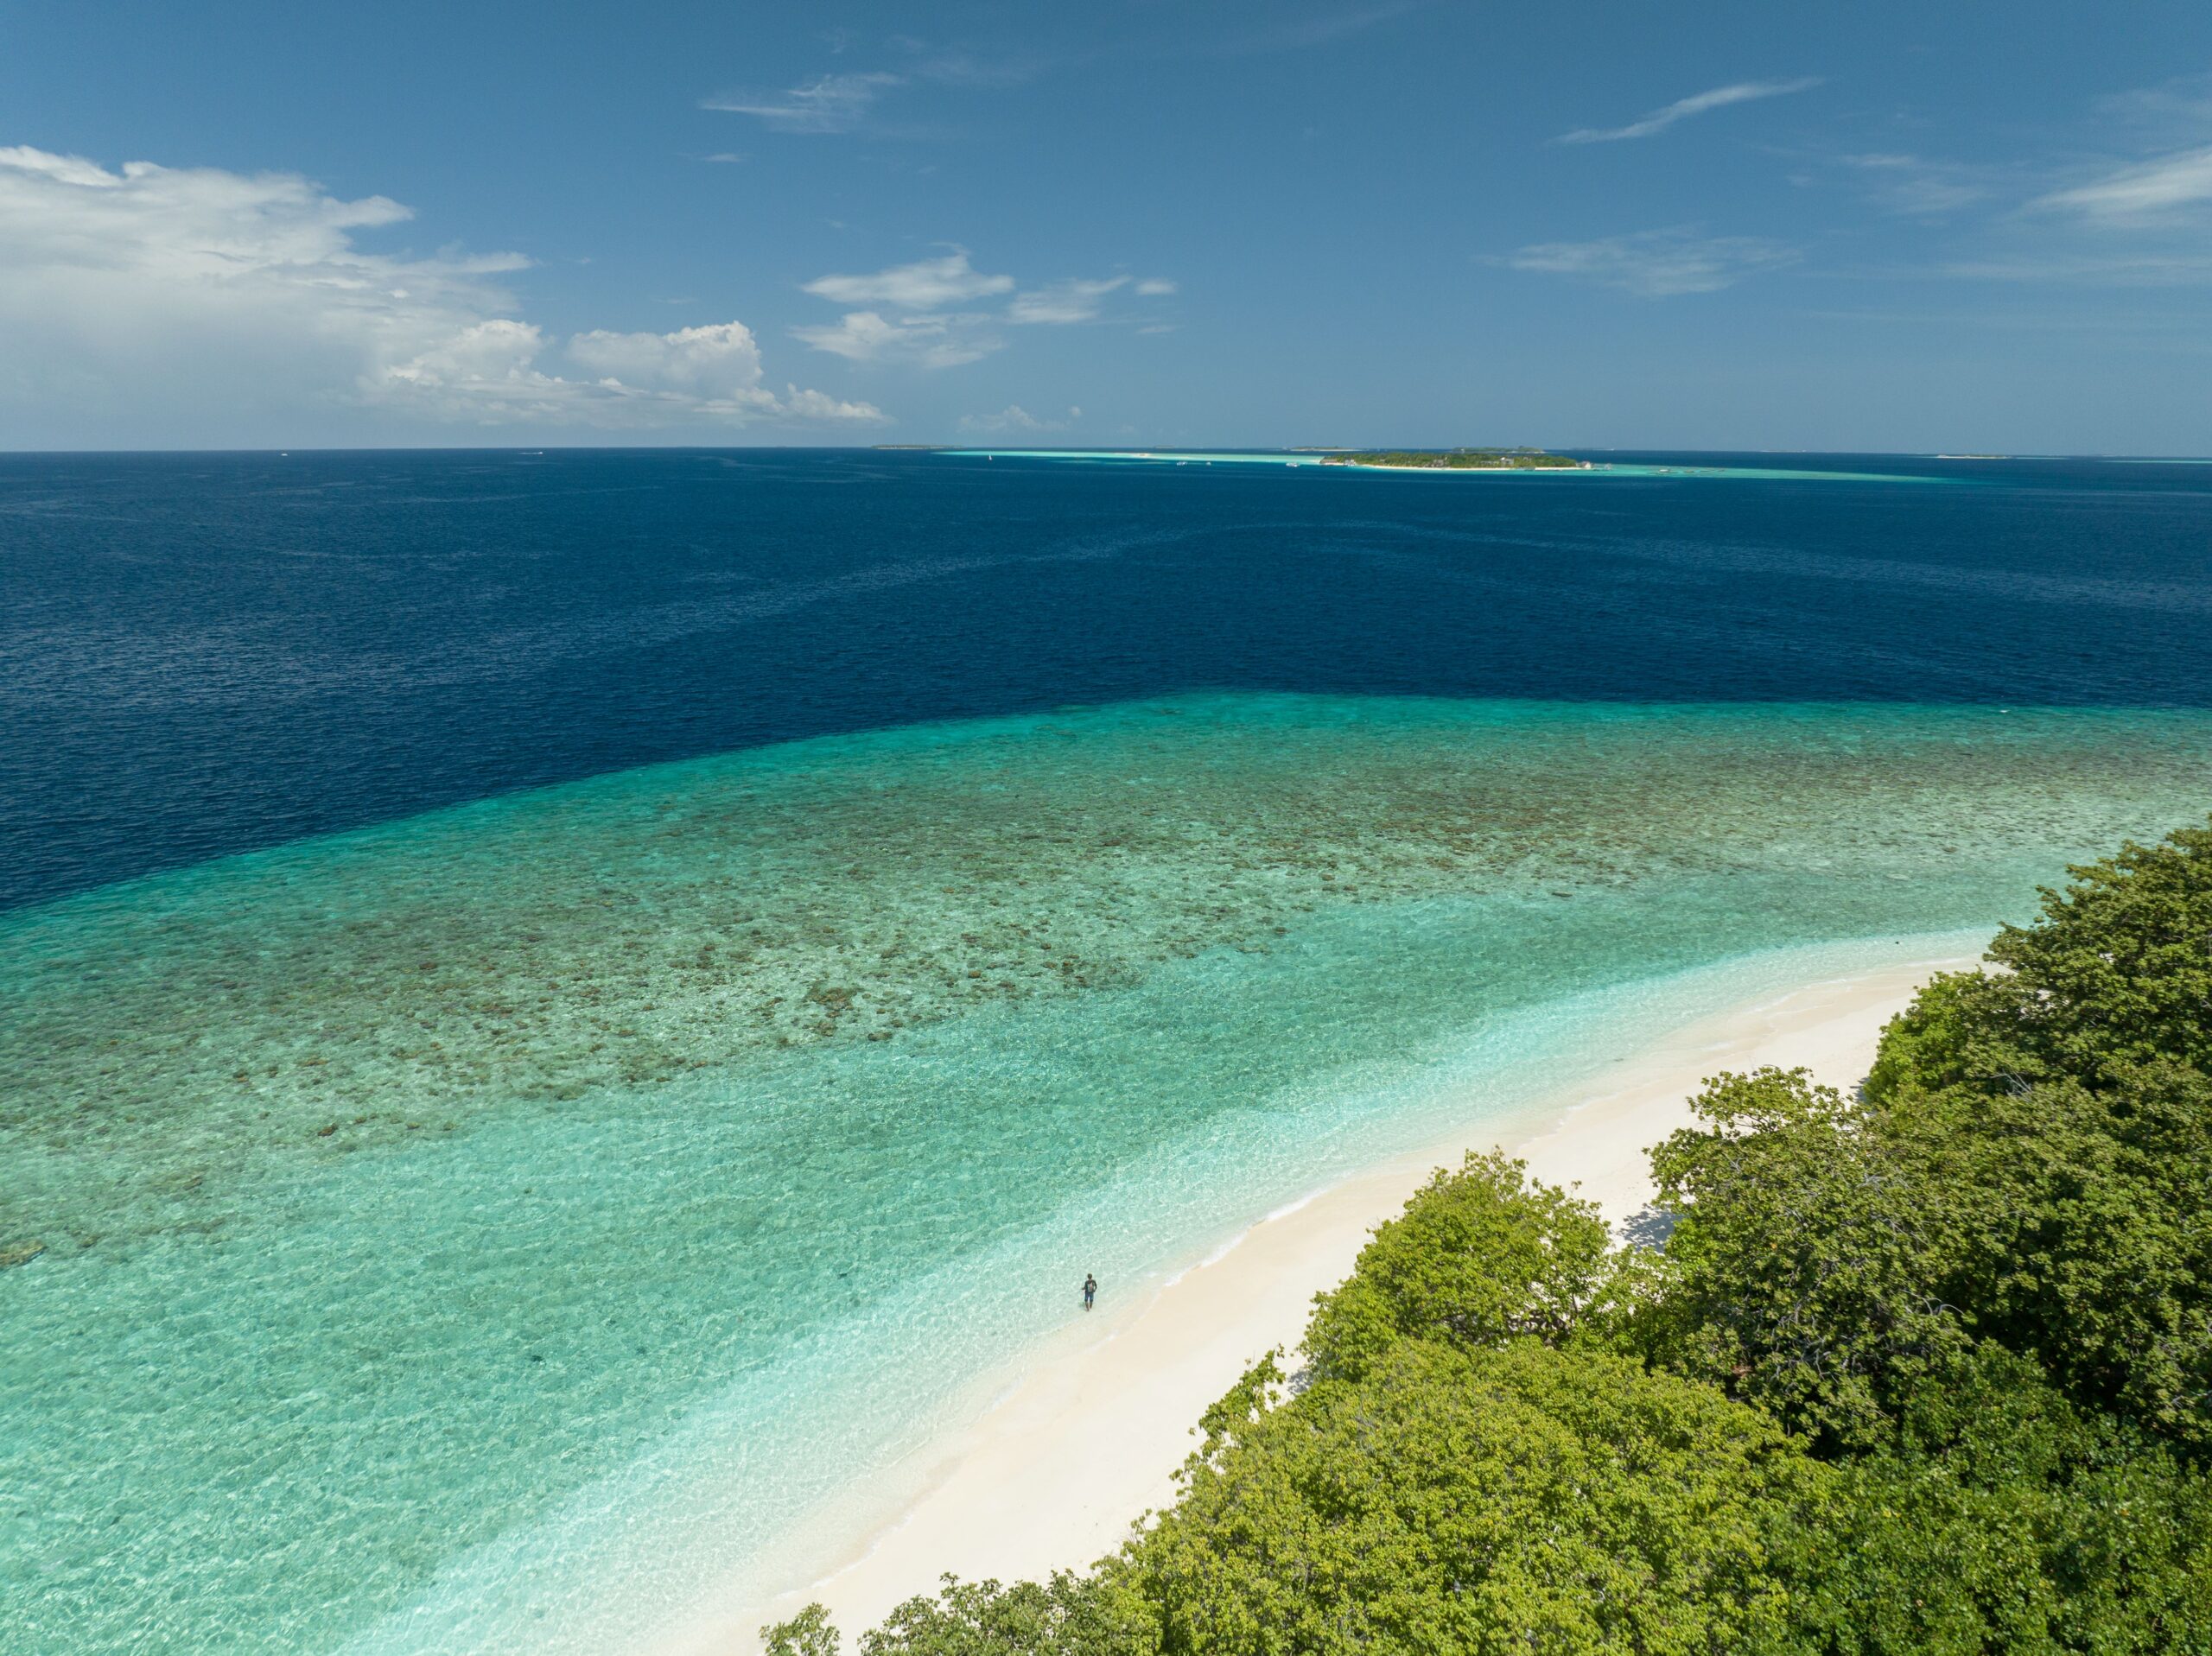 Arial view of the island, with the bay and the woods and the reef, with a person on the beach giving a sense of scale, with clear blue waters and blue sky.